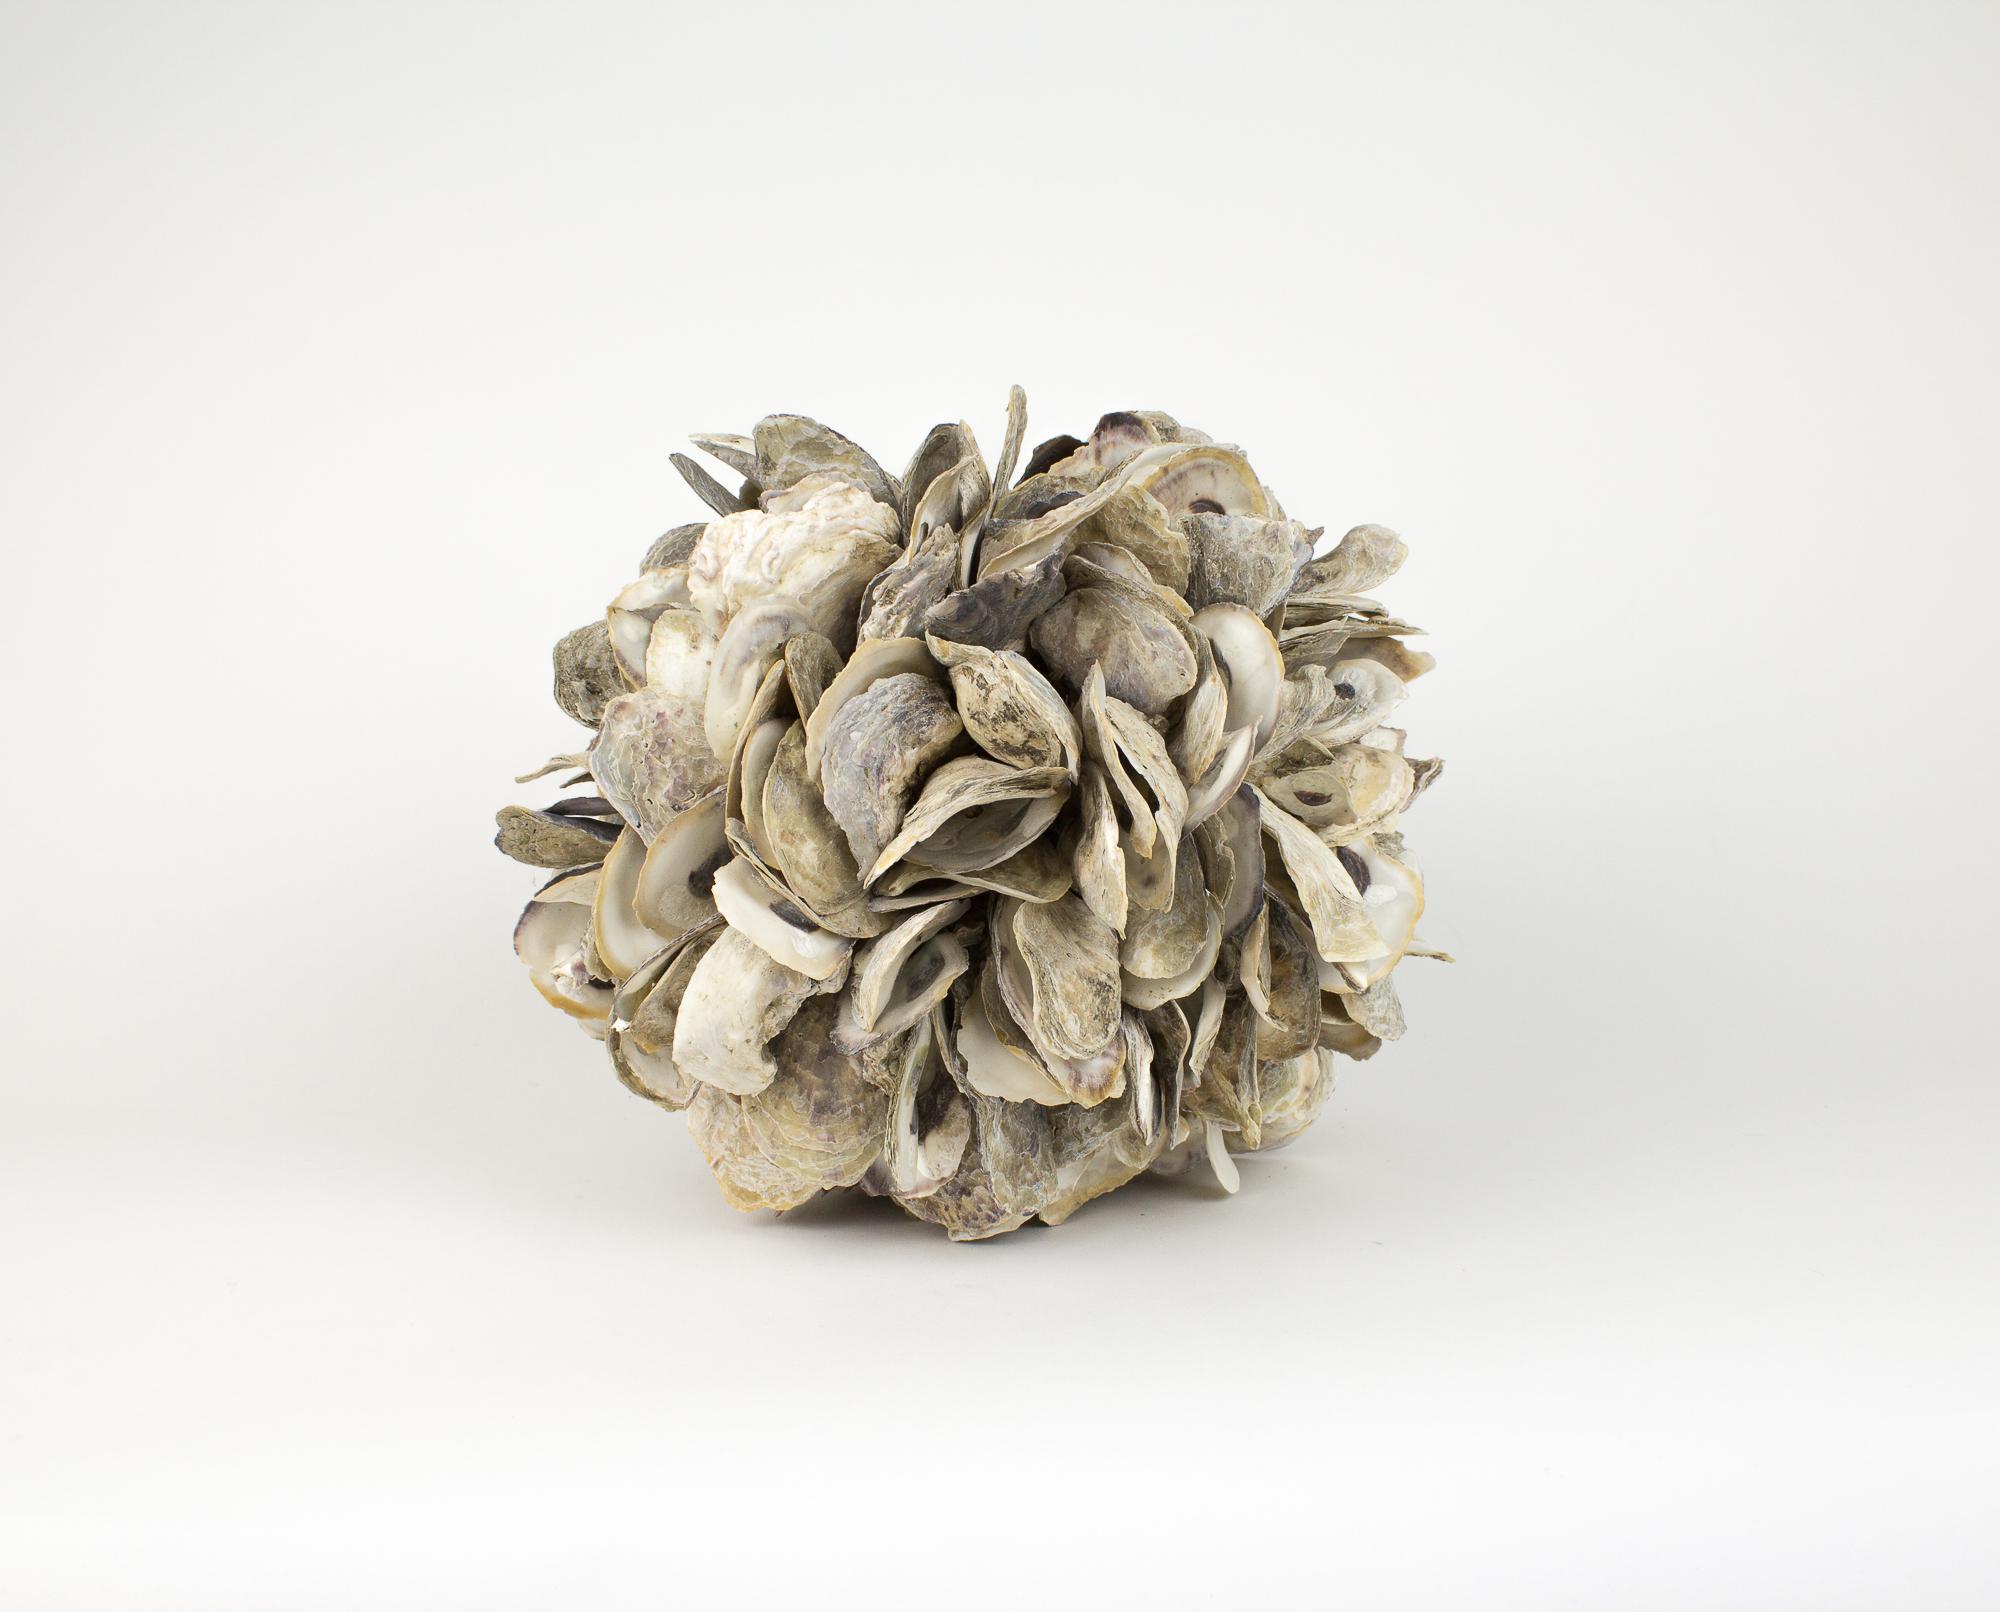 Organic Modern Large Natural Oyster Shell Sphere Sculpture